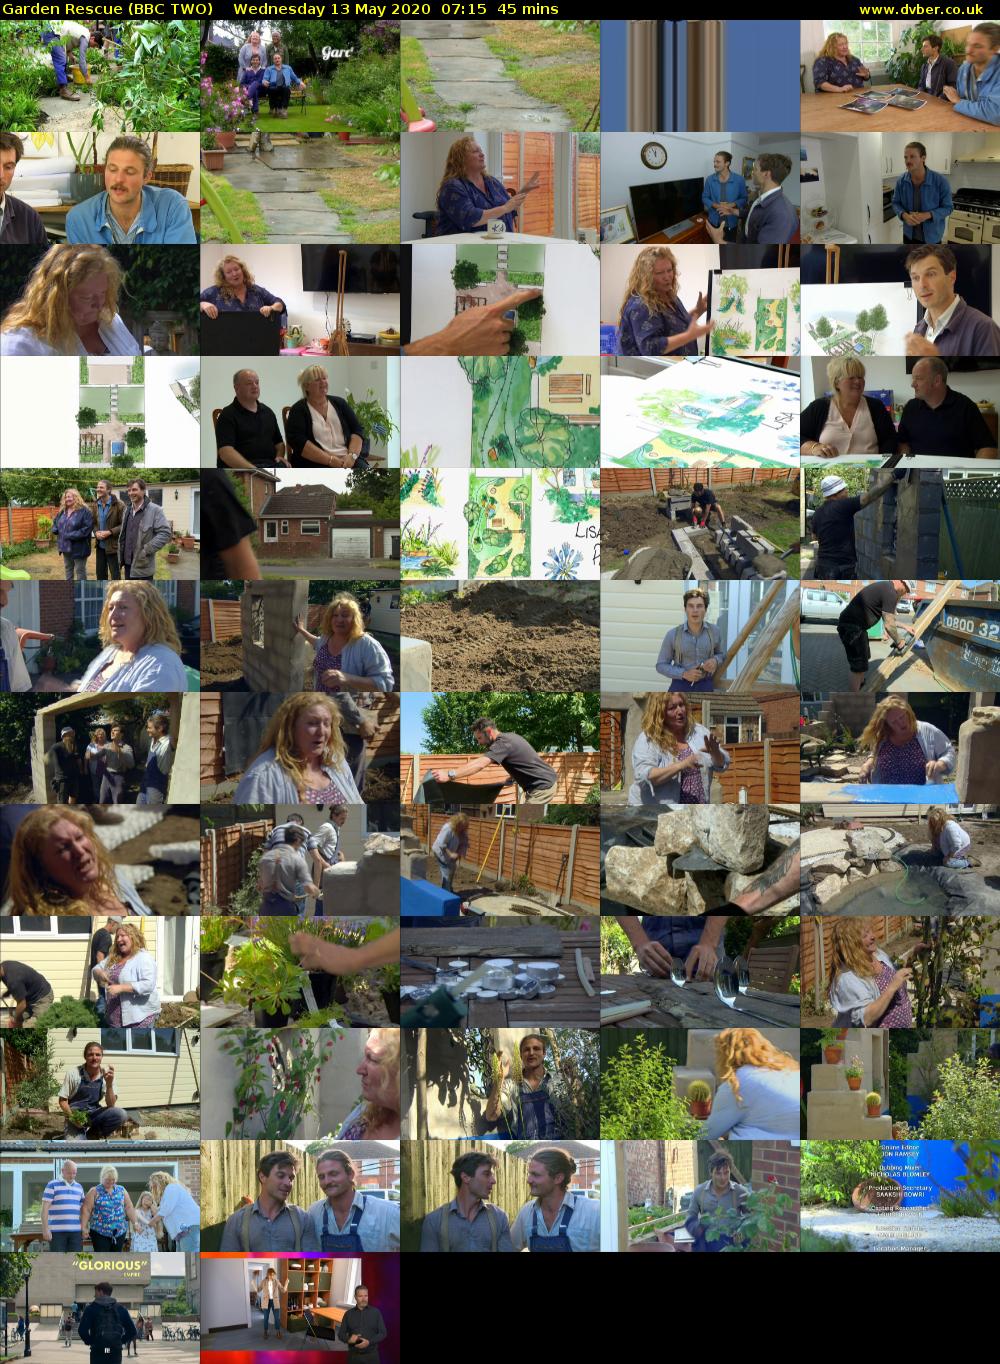 Garden Rescue (BBC TWO) Wednesday 13 May 2020 07:15 - 08:00